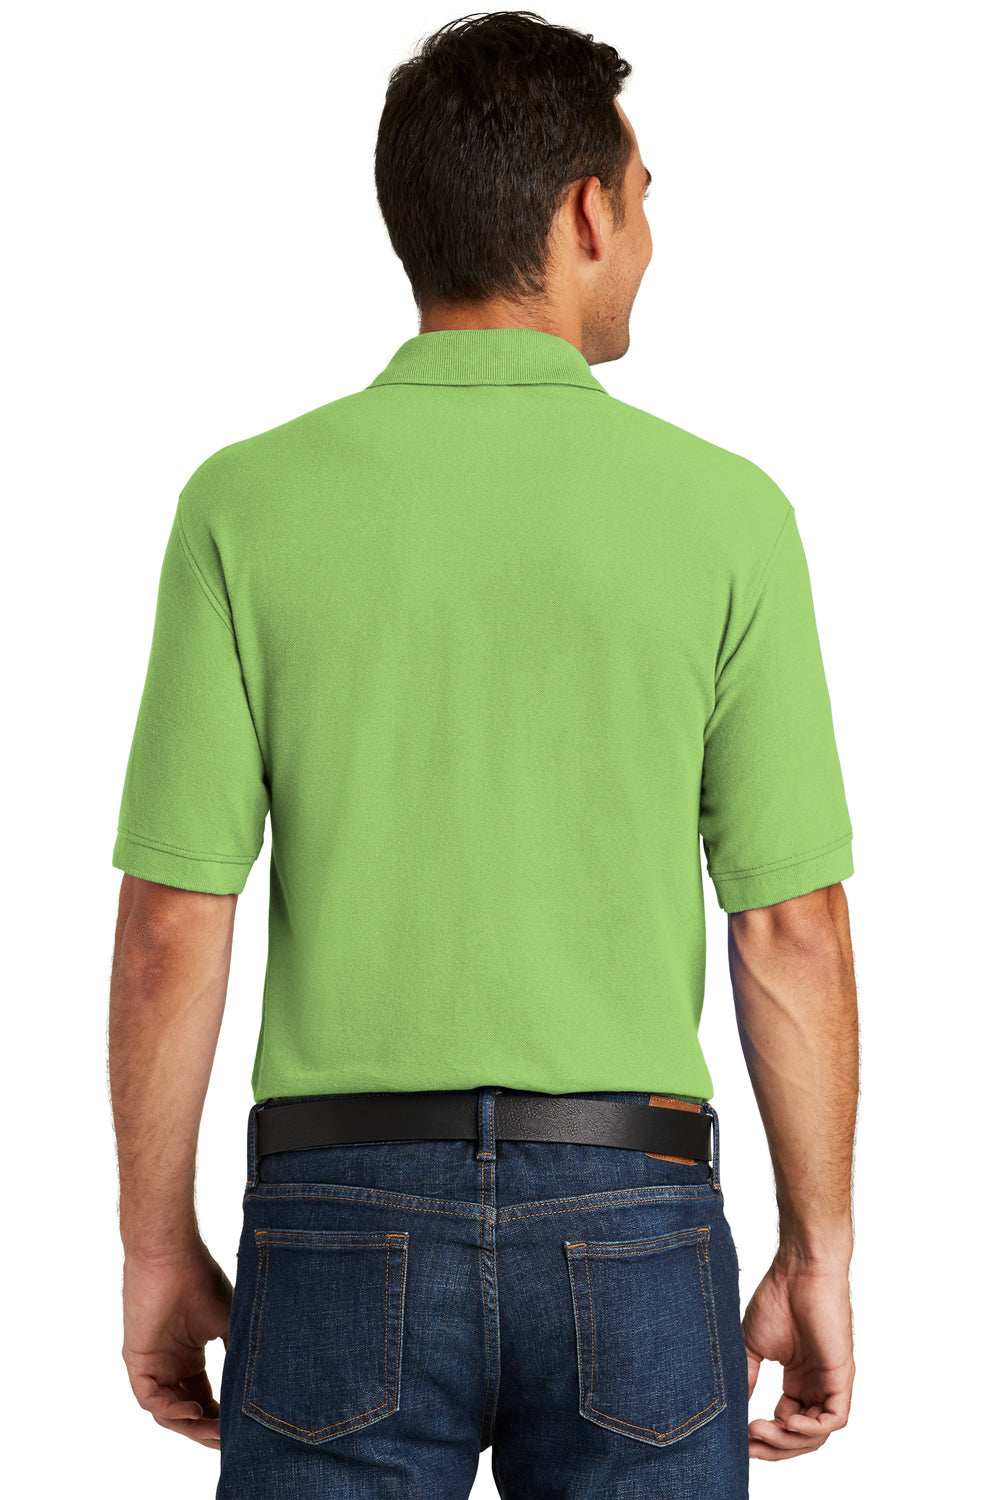 Port & Company KP155 Mens Core Stain Resistant Short Sleeve Polo Shirt Lime Green Back